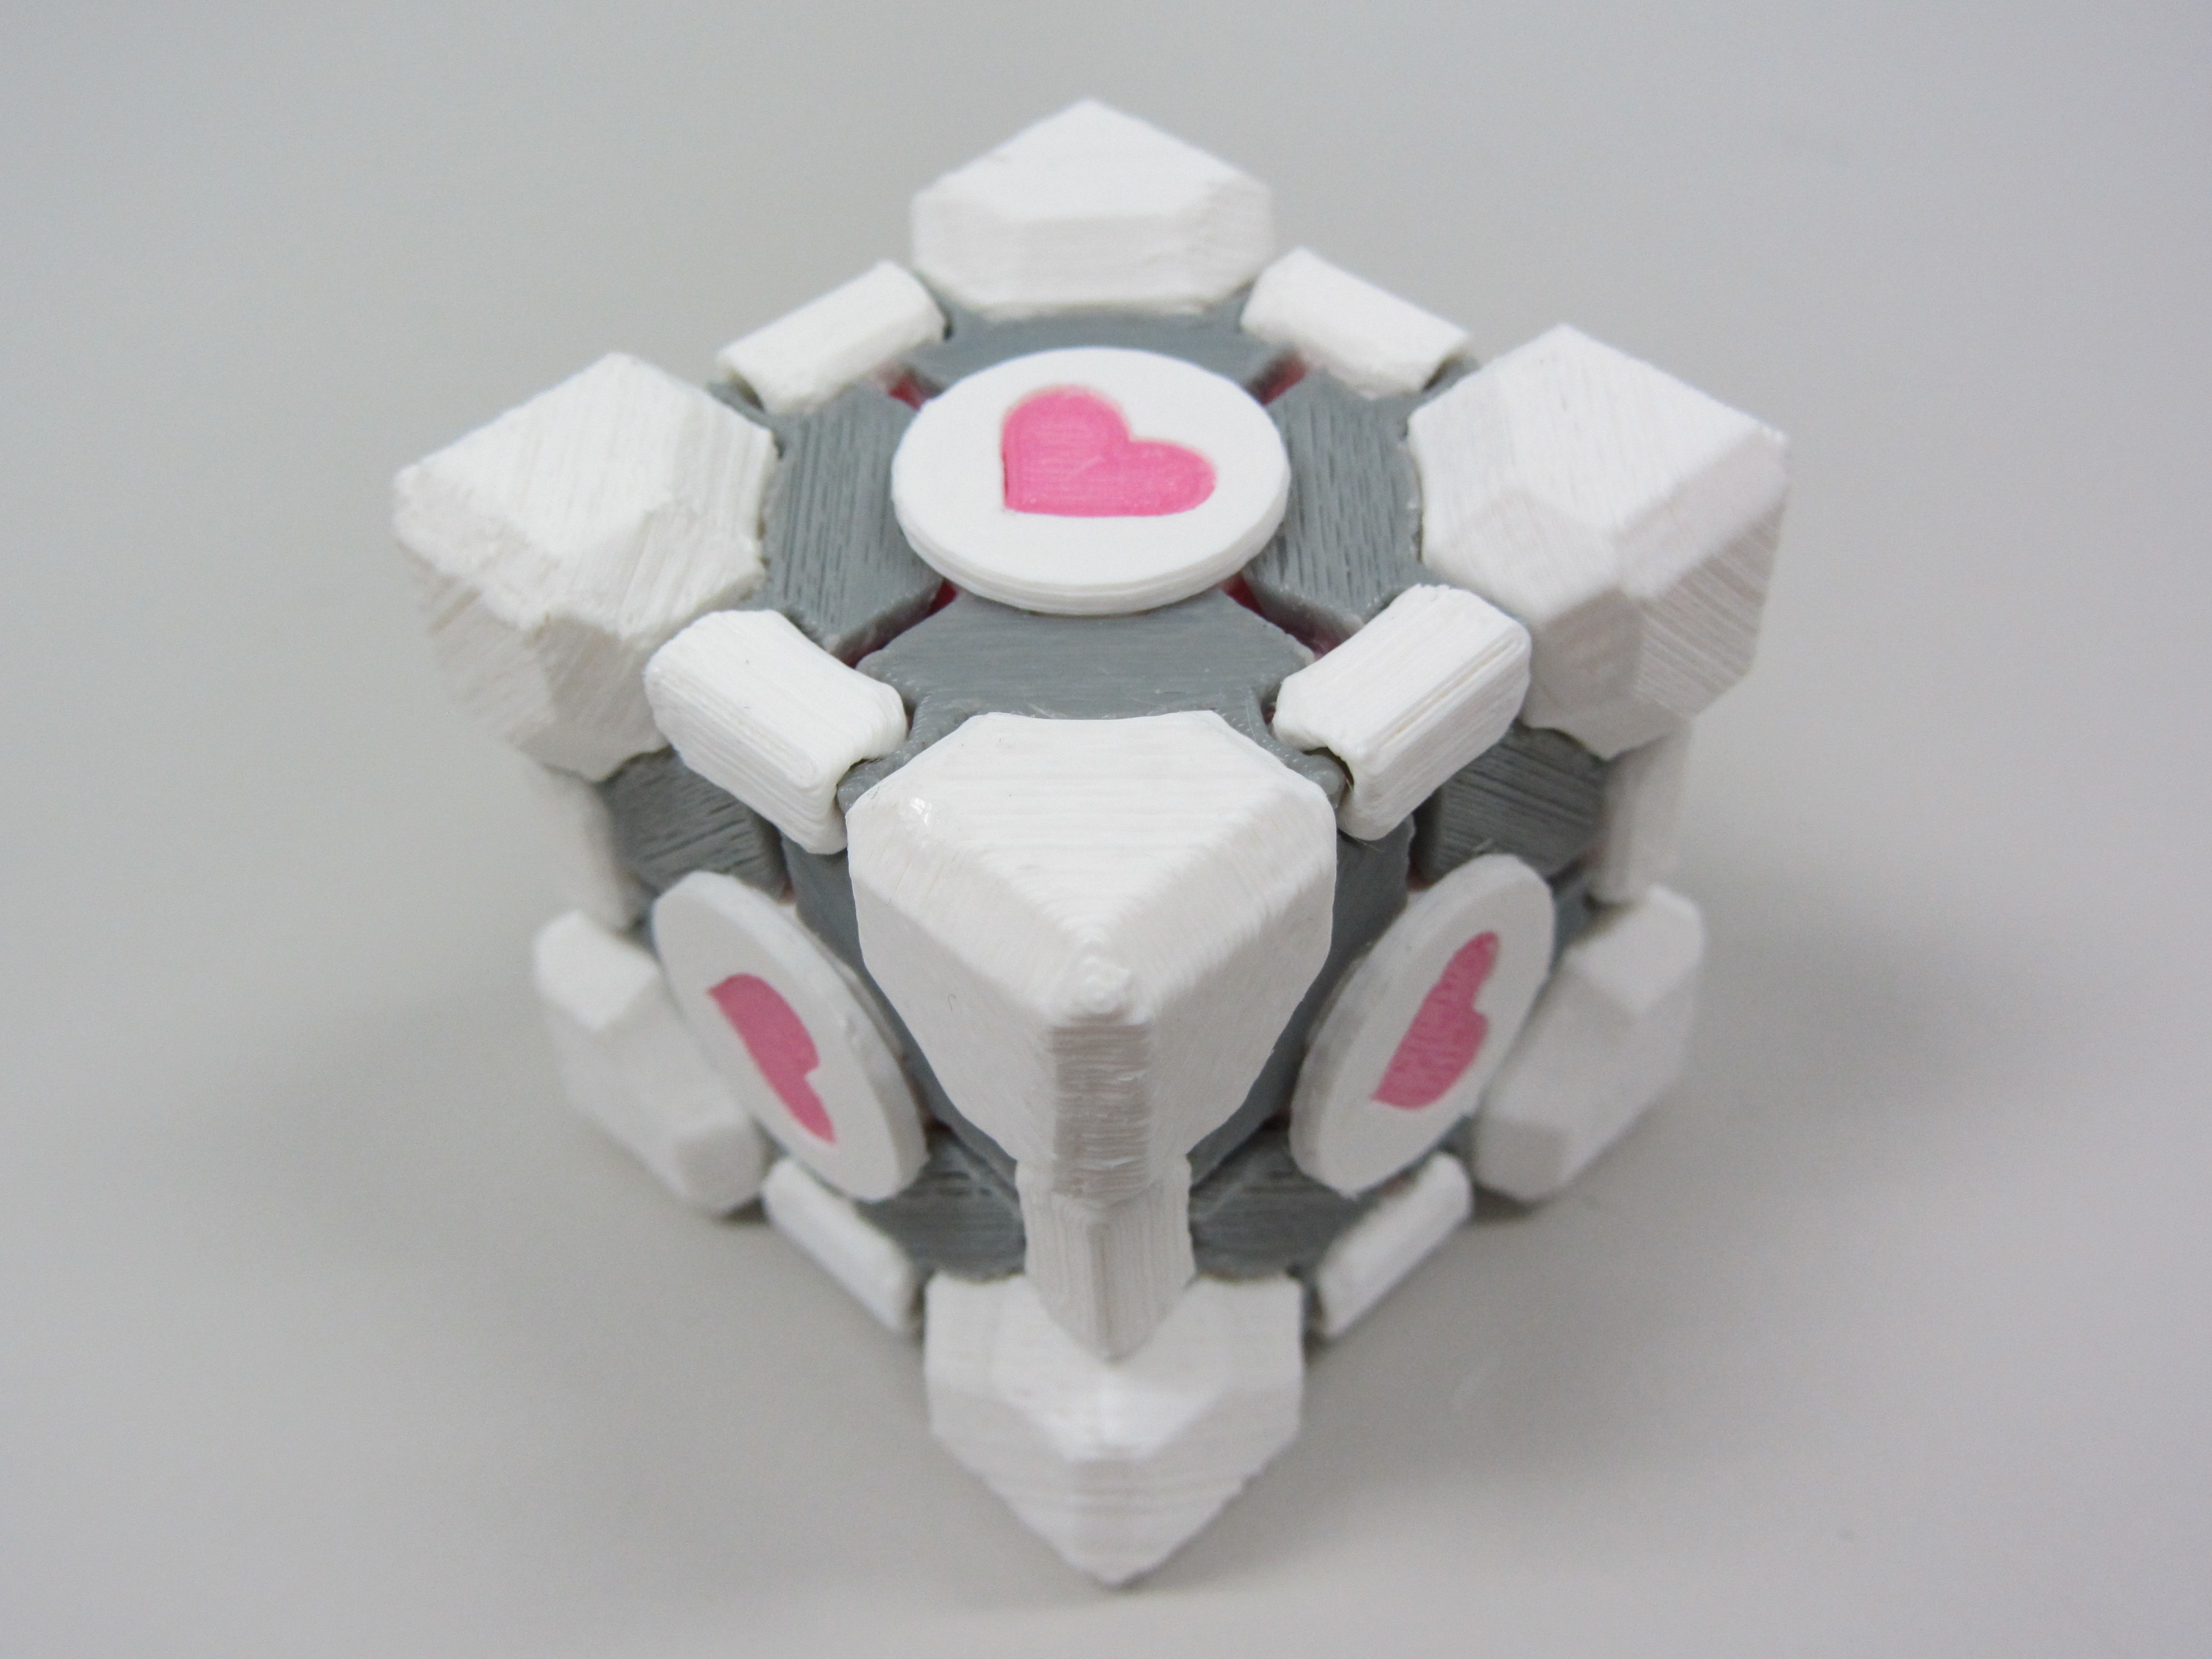 Origami Heart Cube Companion Cube Modular Snap Together Colorized Ellindsey